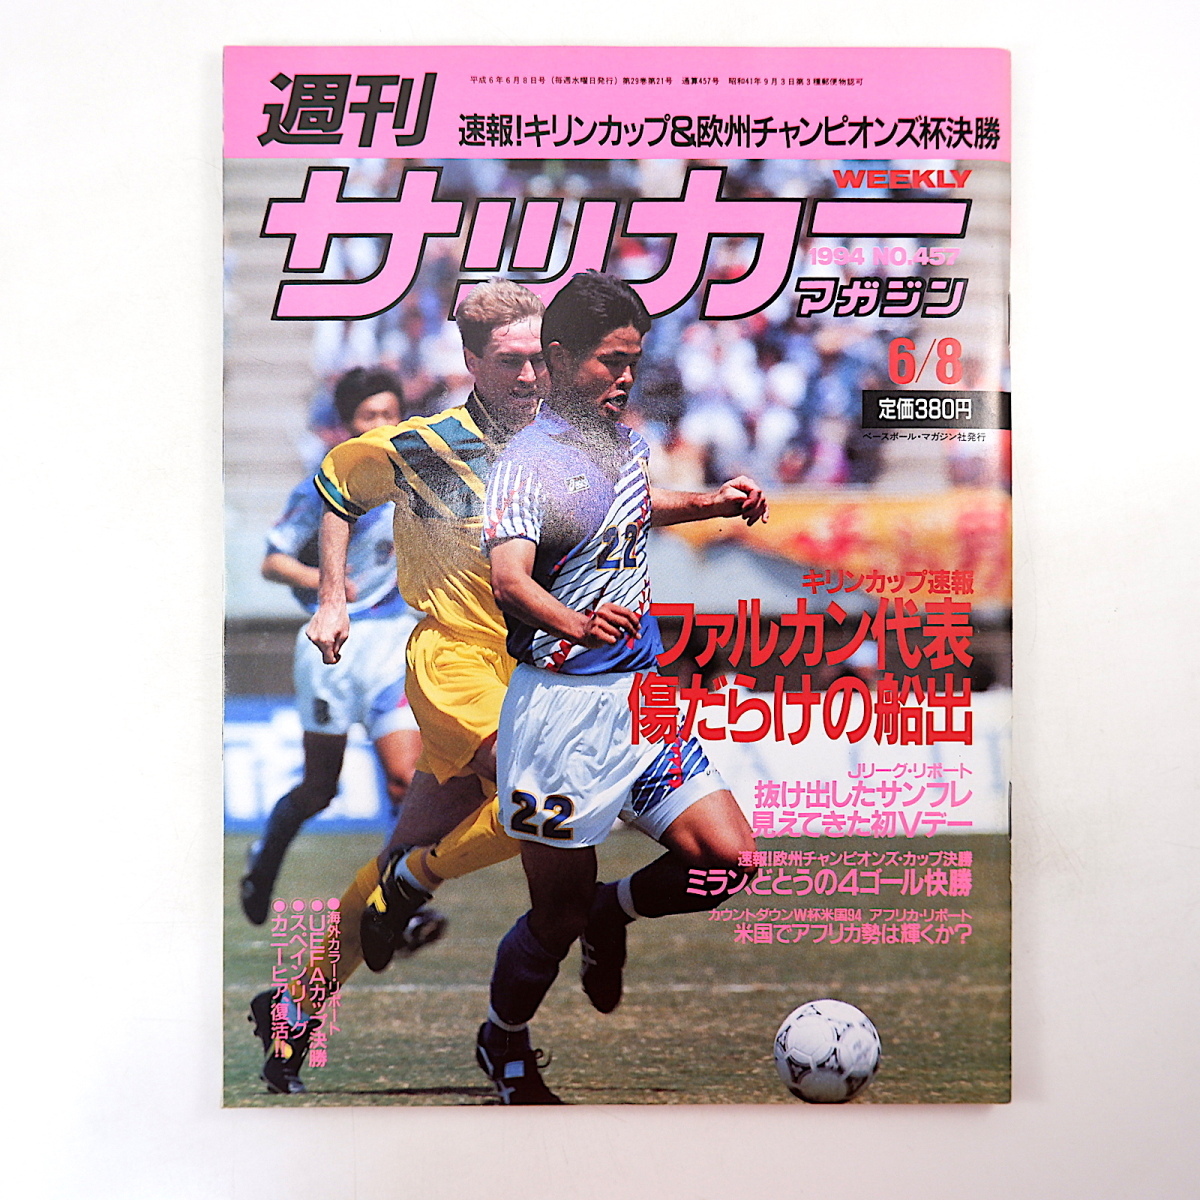  weekly soccer magazine 1994 year 6 month 8 day number * small .. history fa LUKA n Japan representative W cup American convention count down . wistaria .. sun fre che / che ru knee 